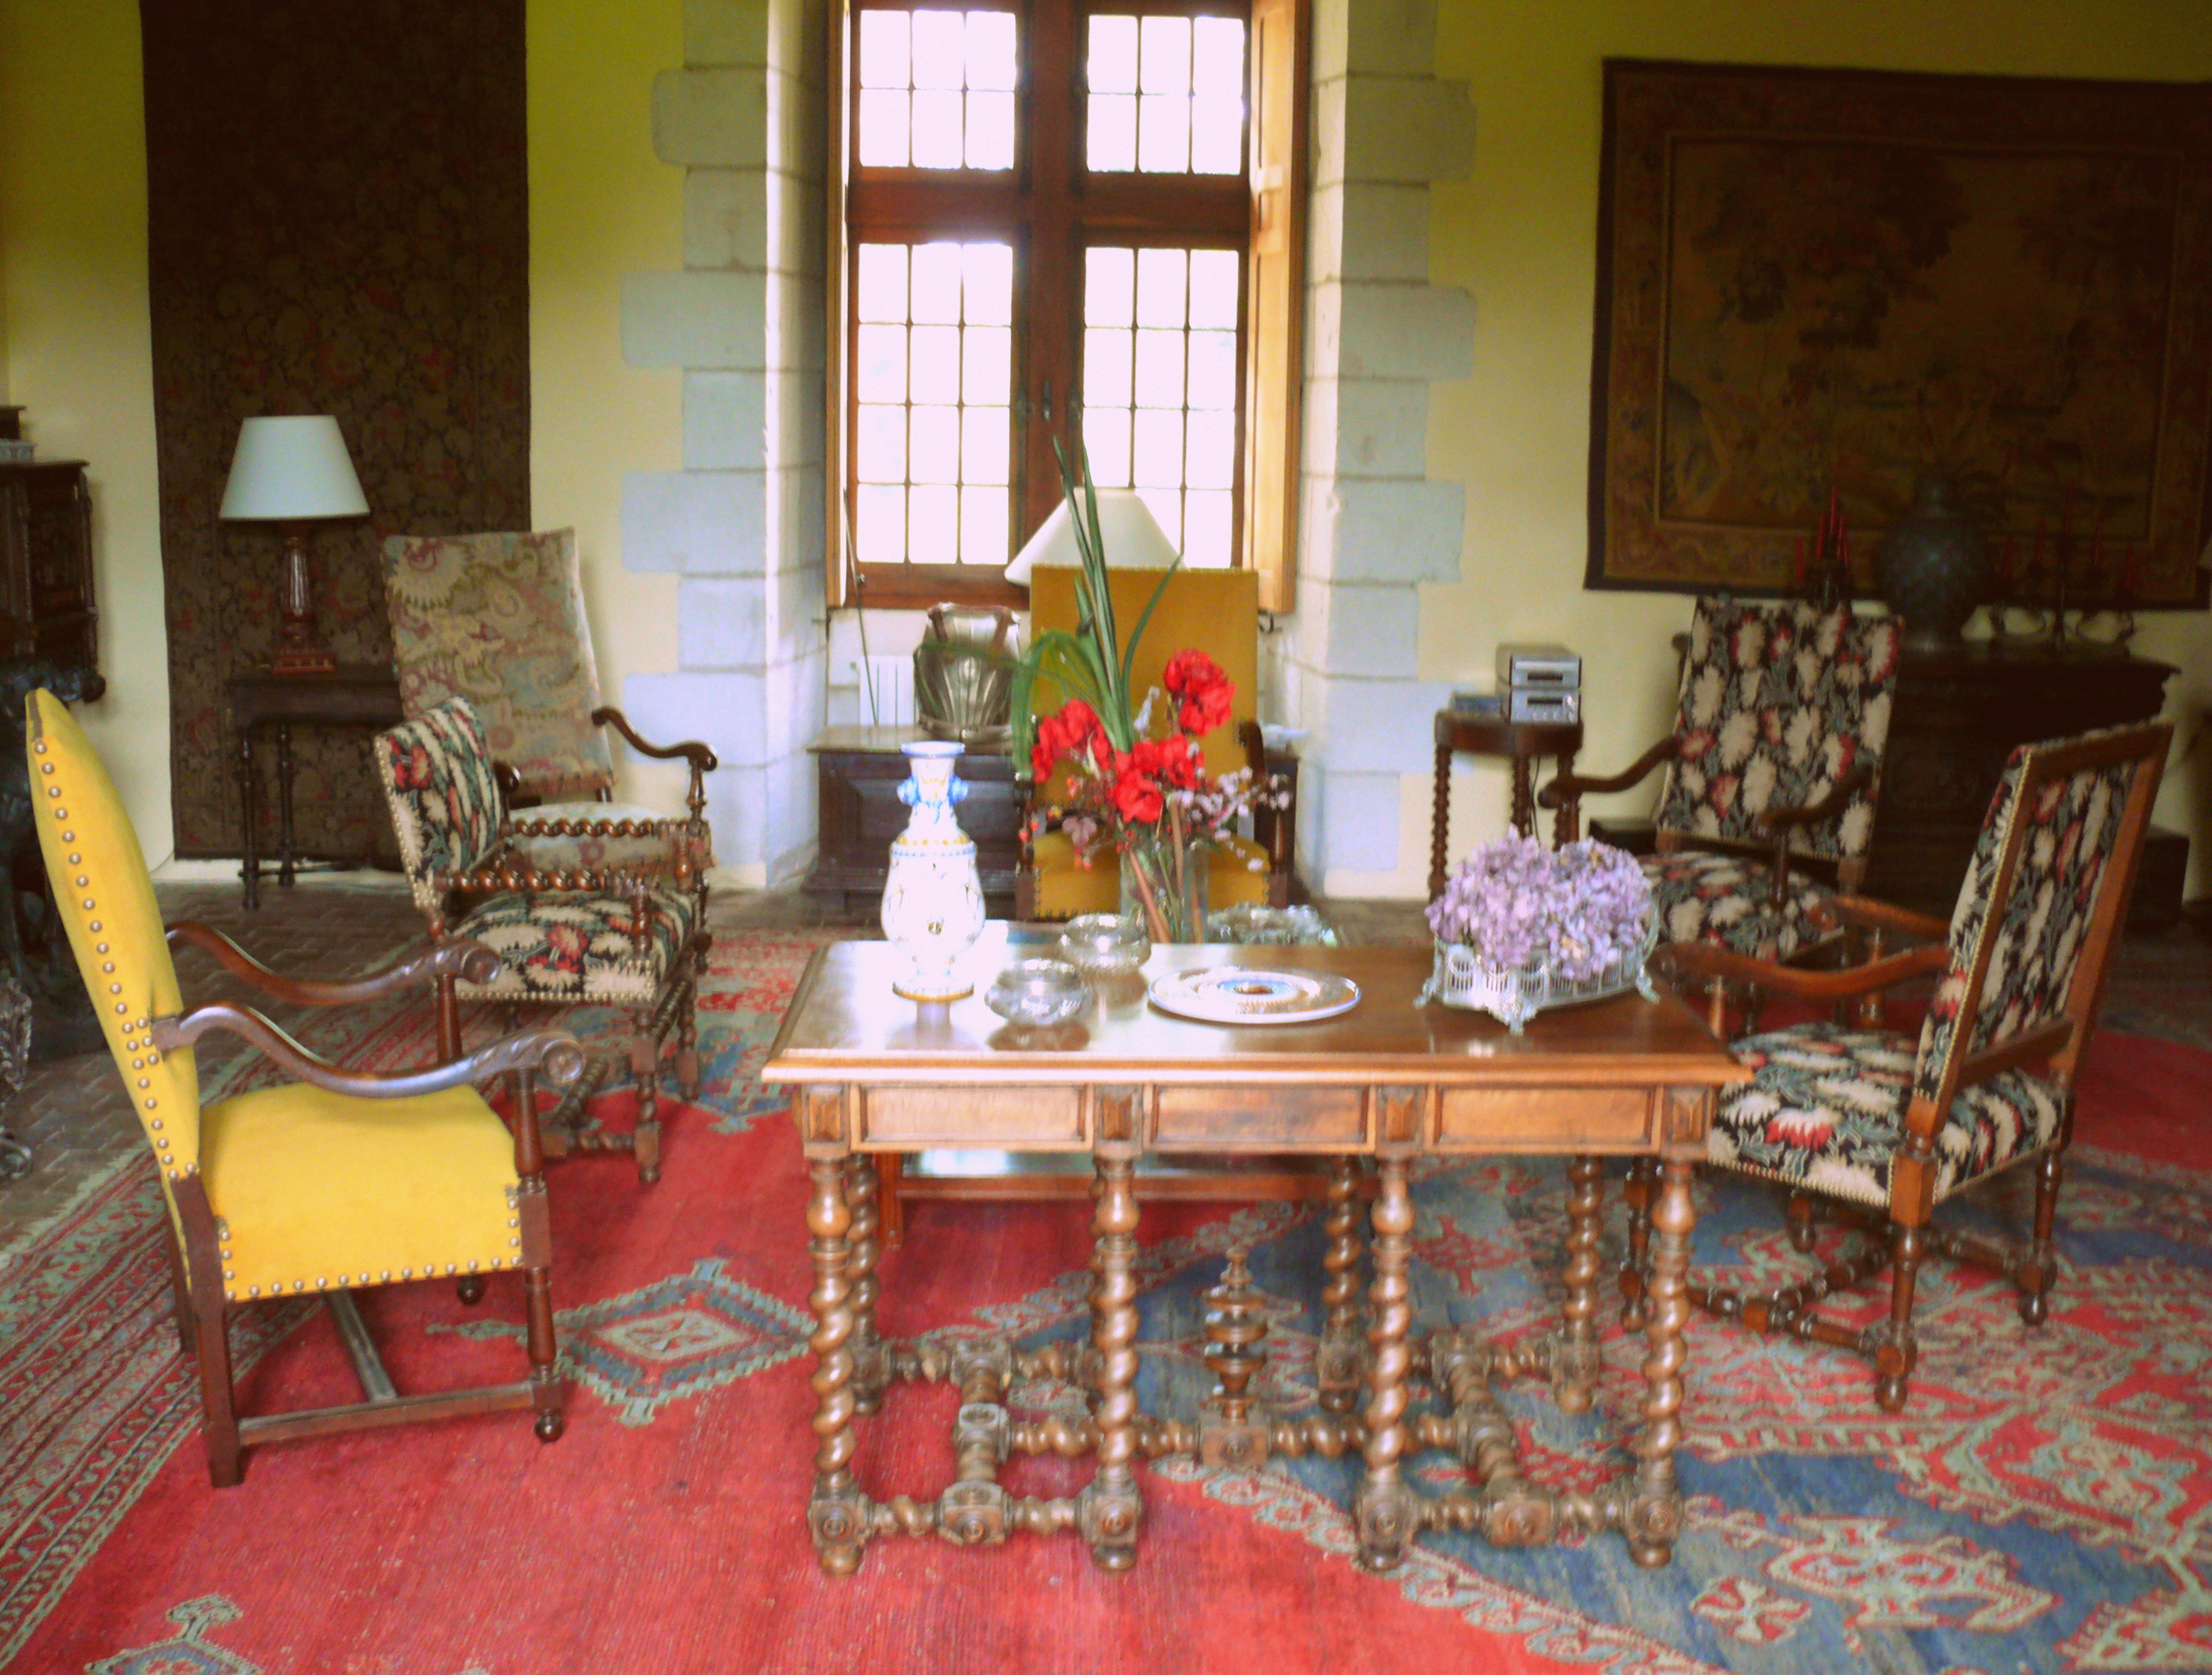 Chateaux interior